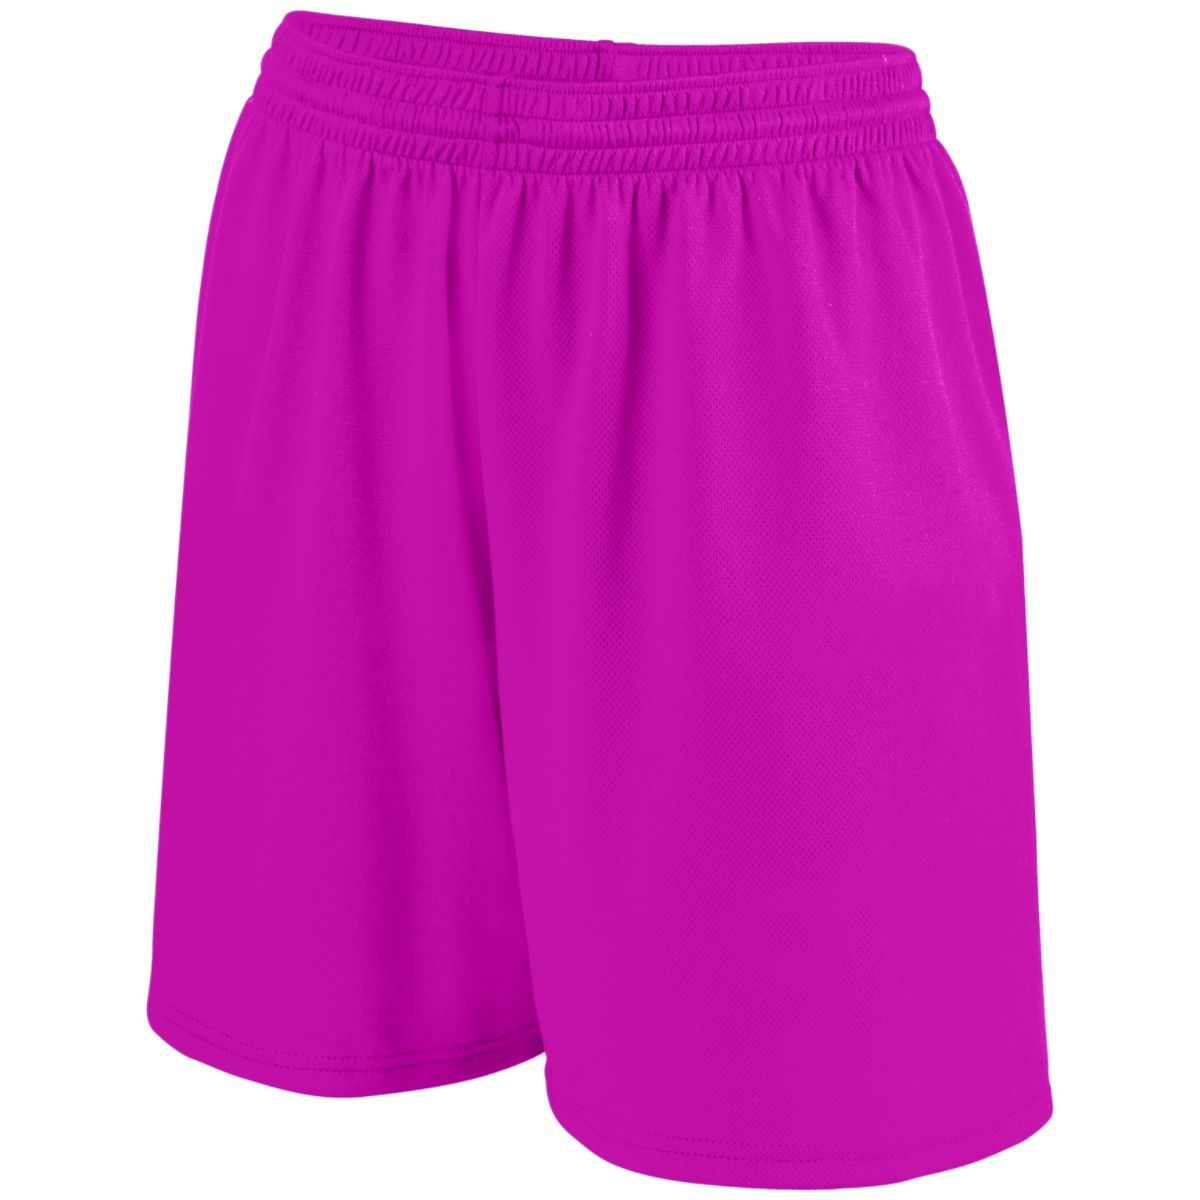 Augusta Sportswear Girls Shockwave Shorts in Power Pink/White  -Part of the Girls, Augusta-Products, Softball, Girls-Shorts product lines at KanaleyCreations.com